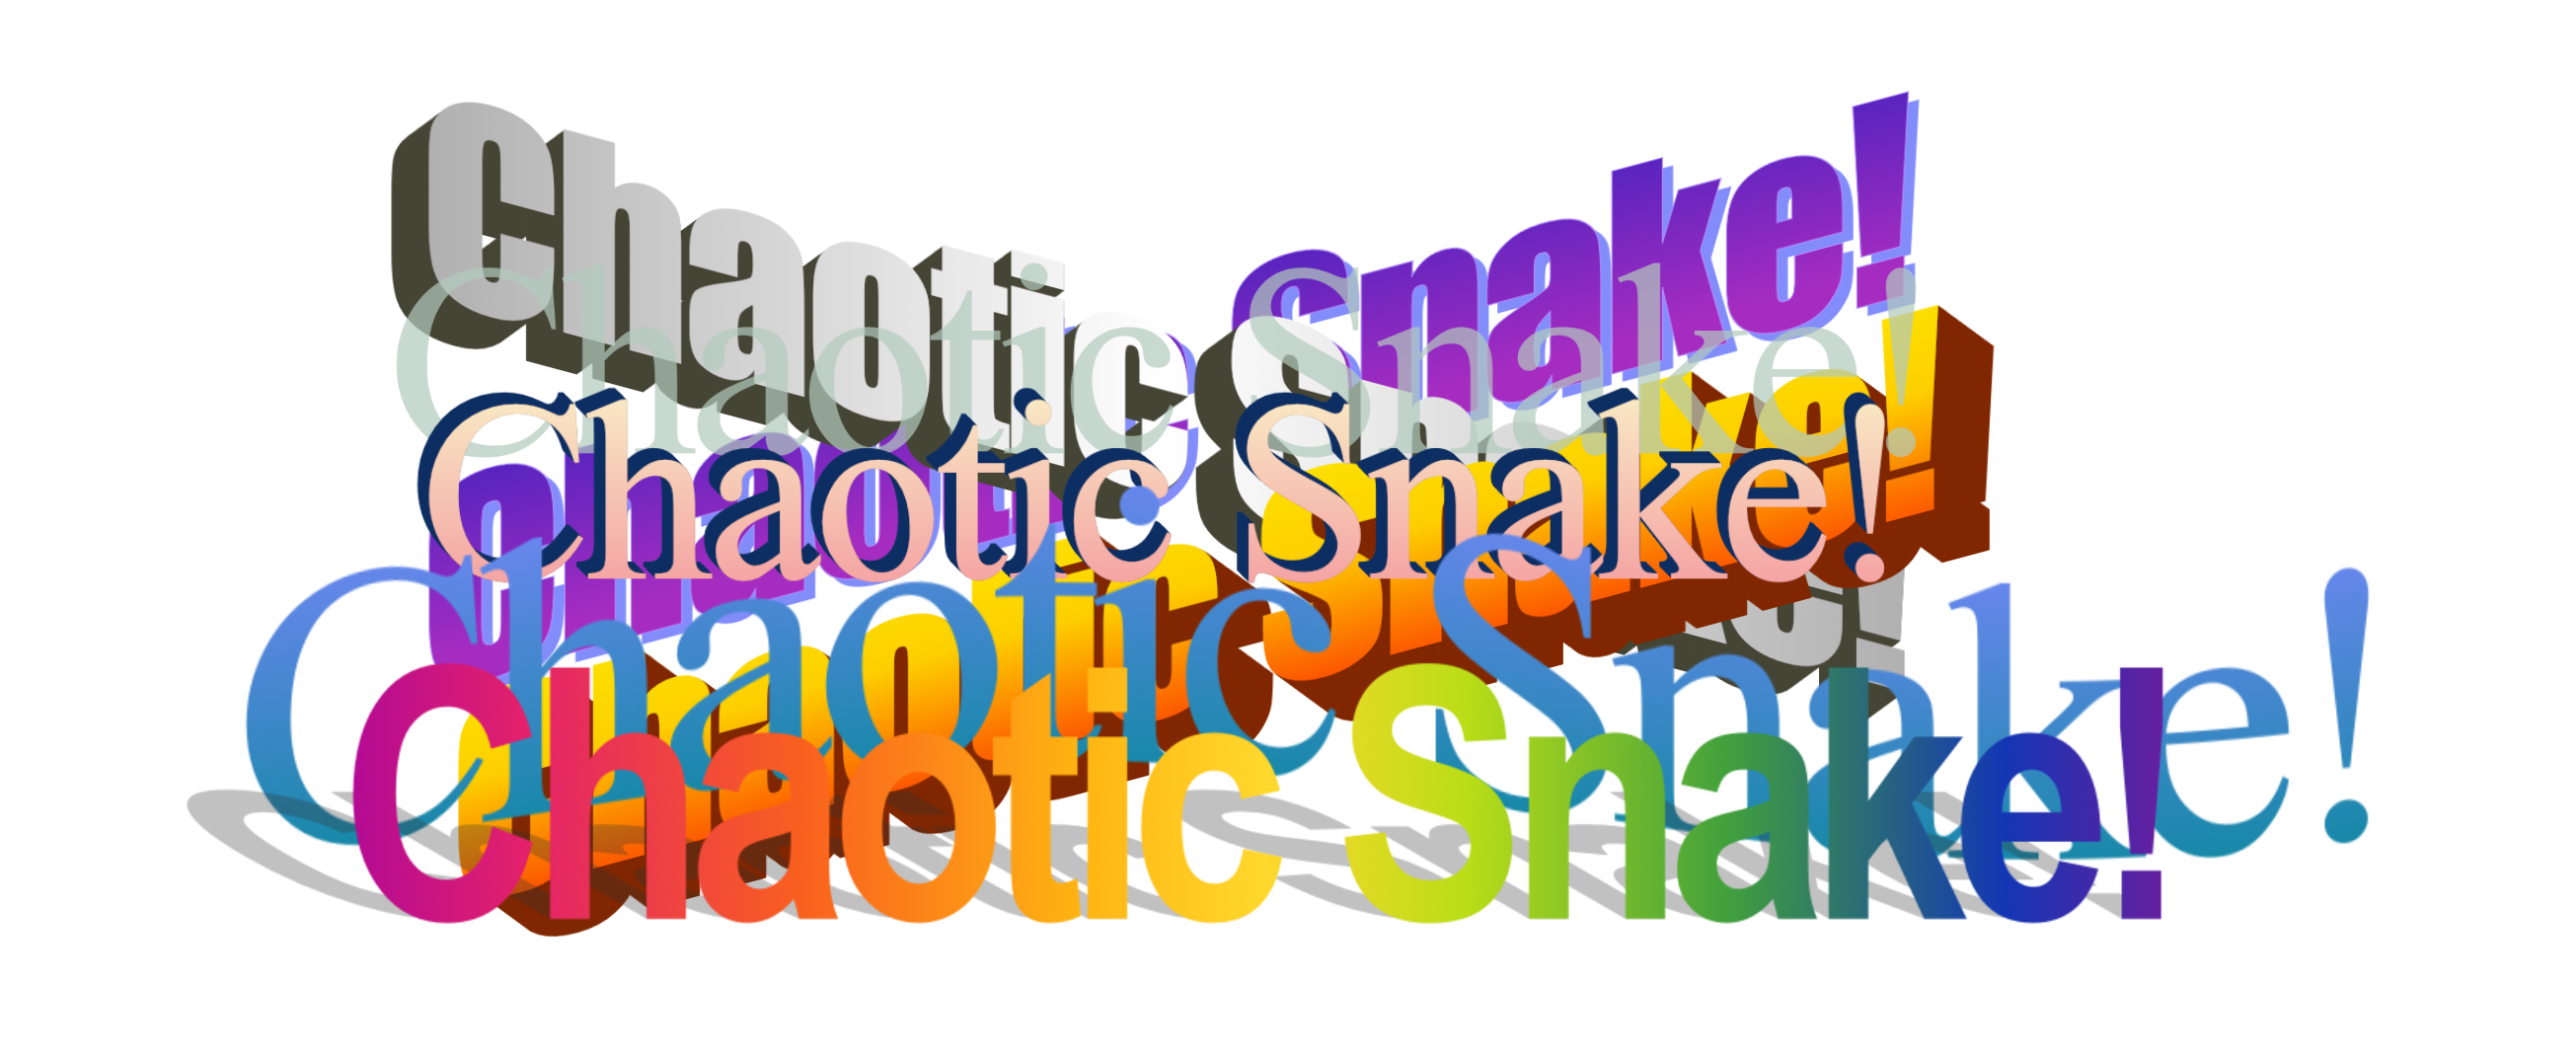 Chaotic Snake!